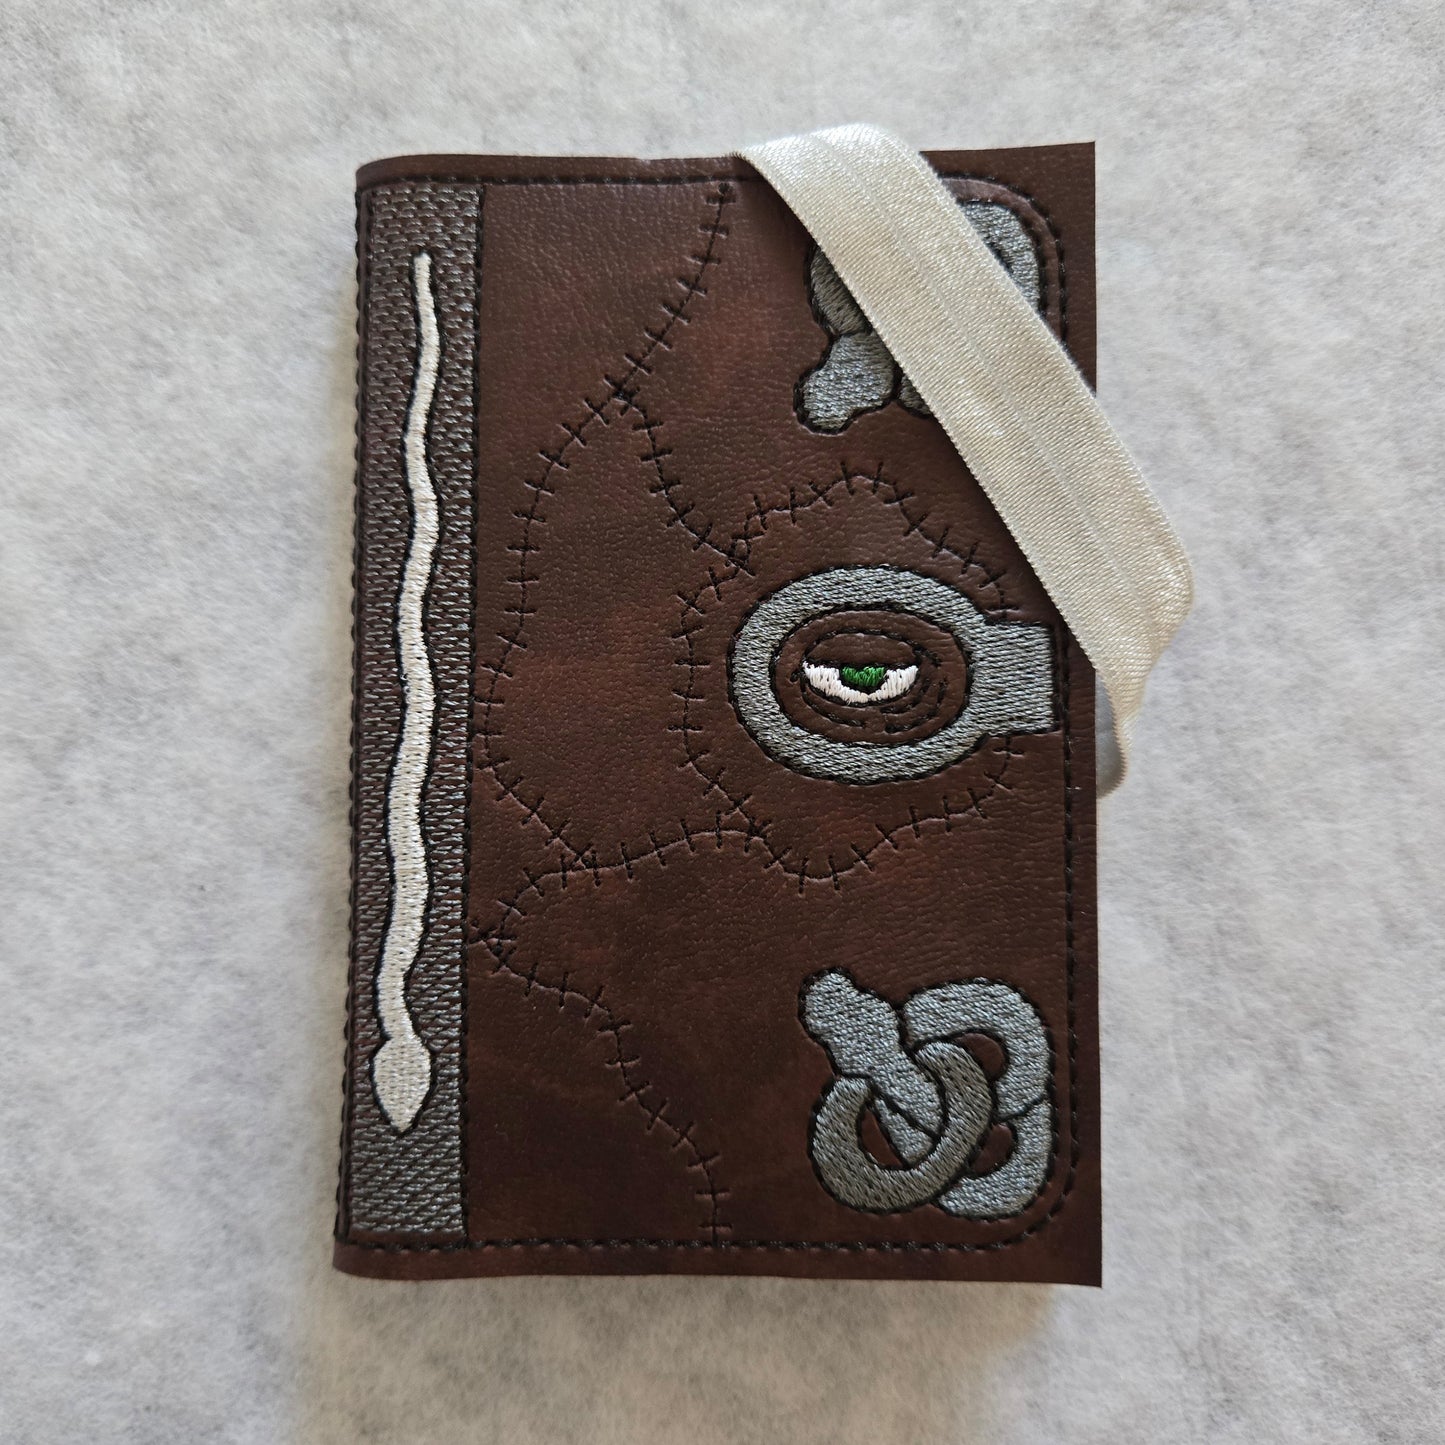 Booook Embroidered Notebook Cover